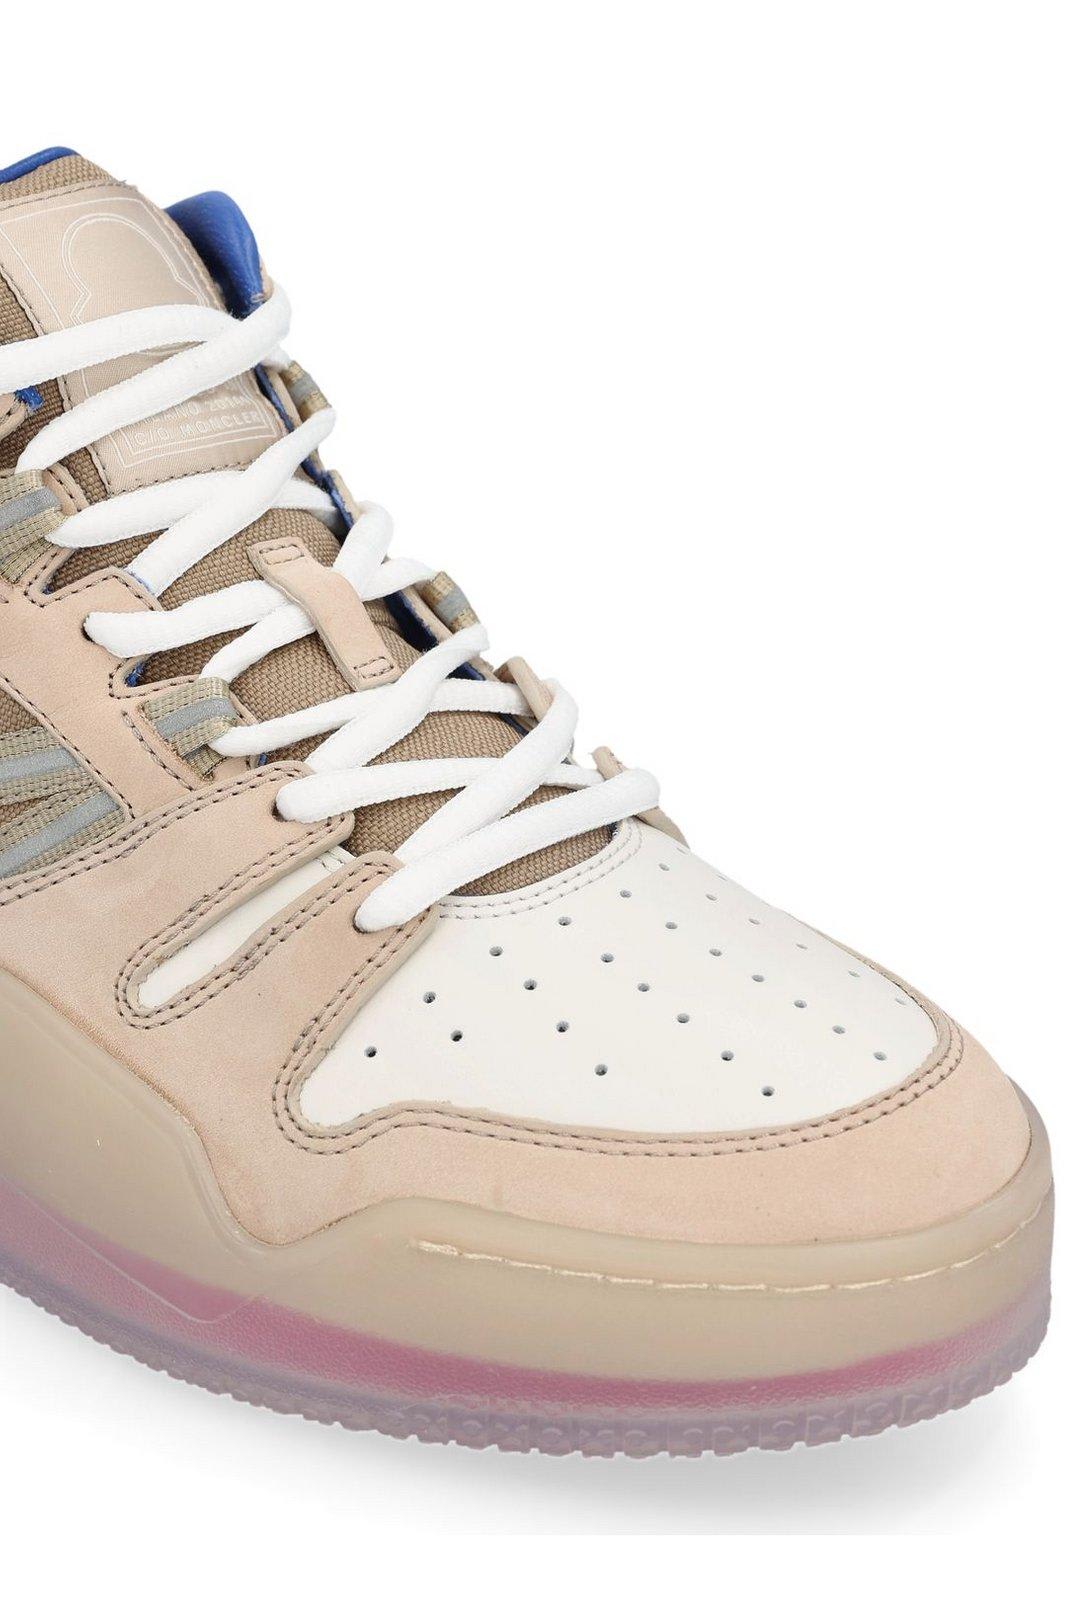 Shop Moncler Pivot High Top Sneakers In Pink